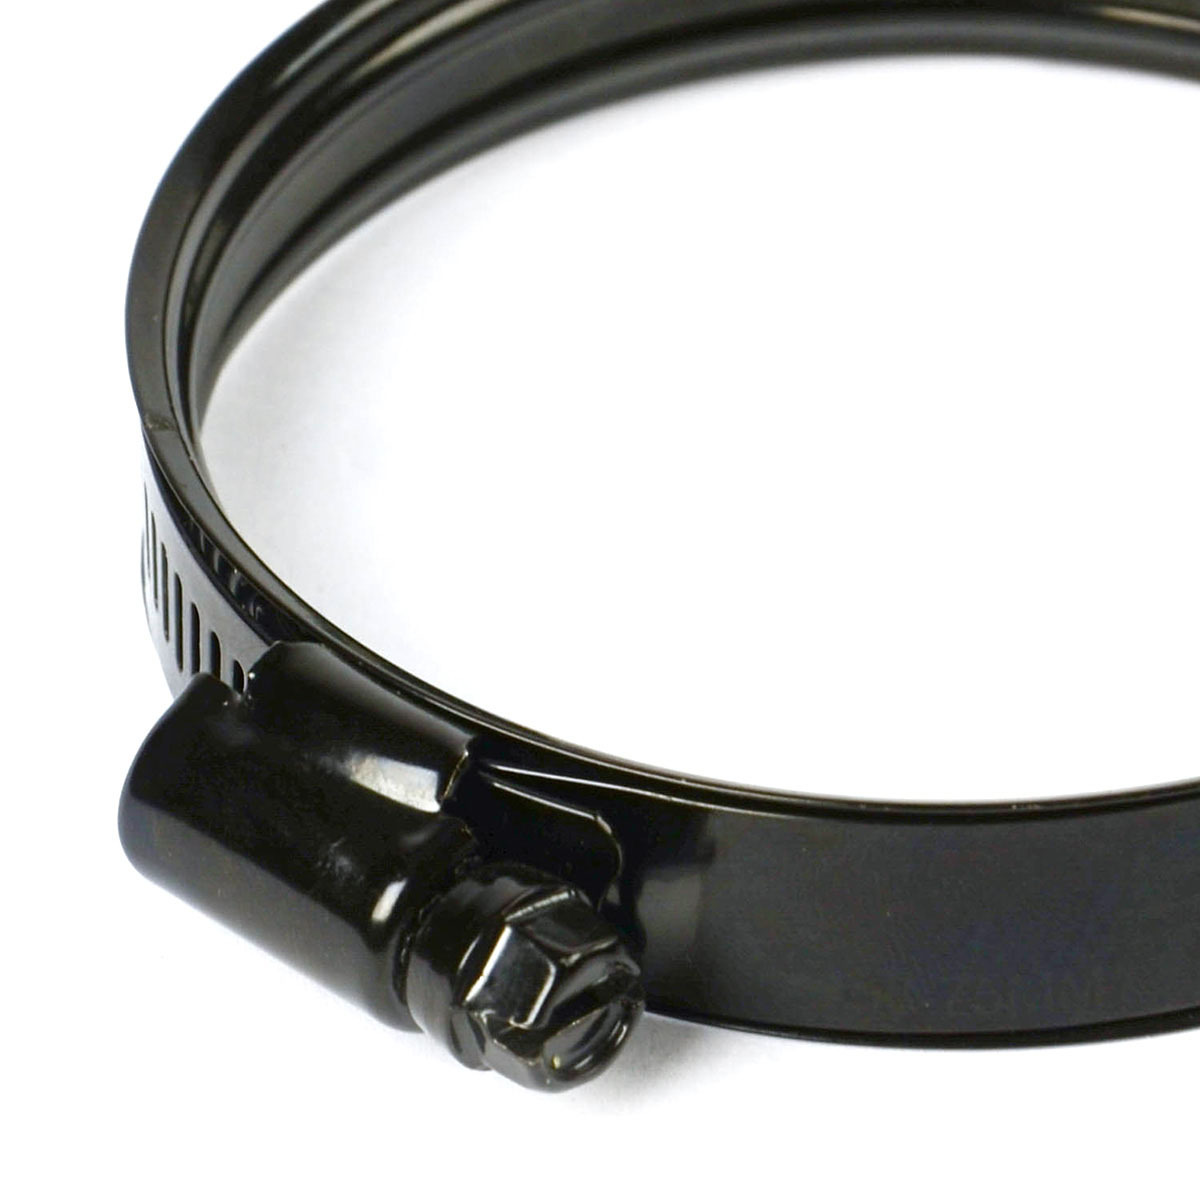 Hose Clamp Dual Bead Black Stainless Steel 73mm - 90mm